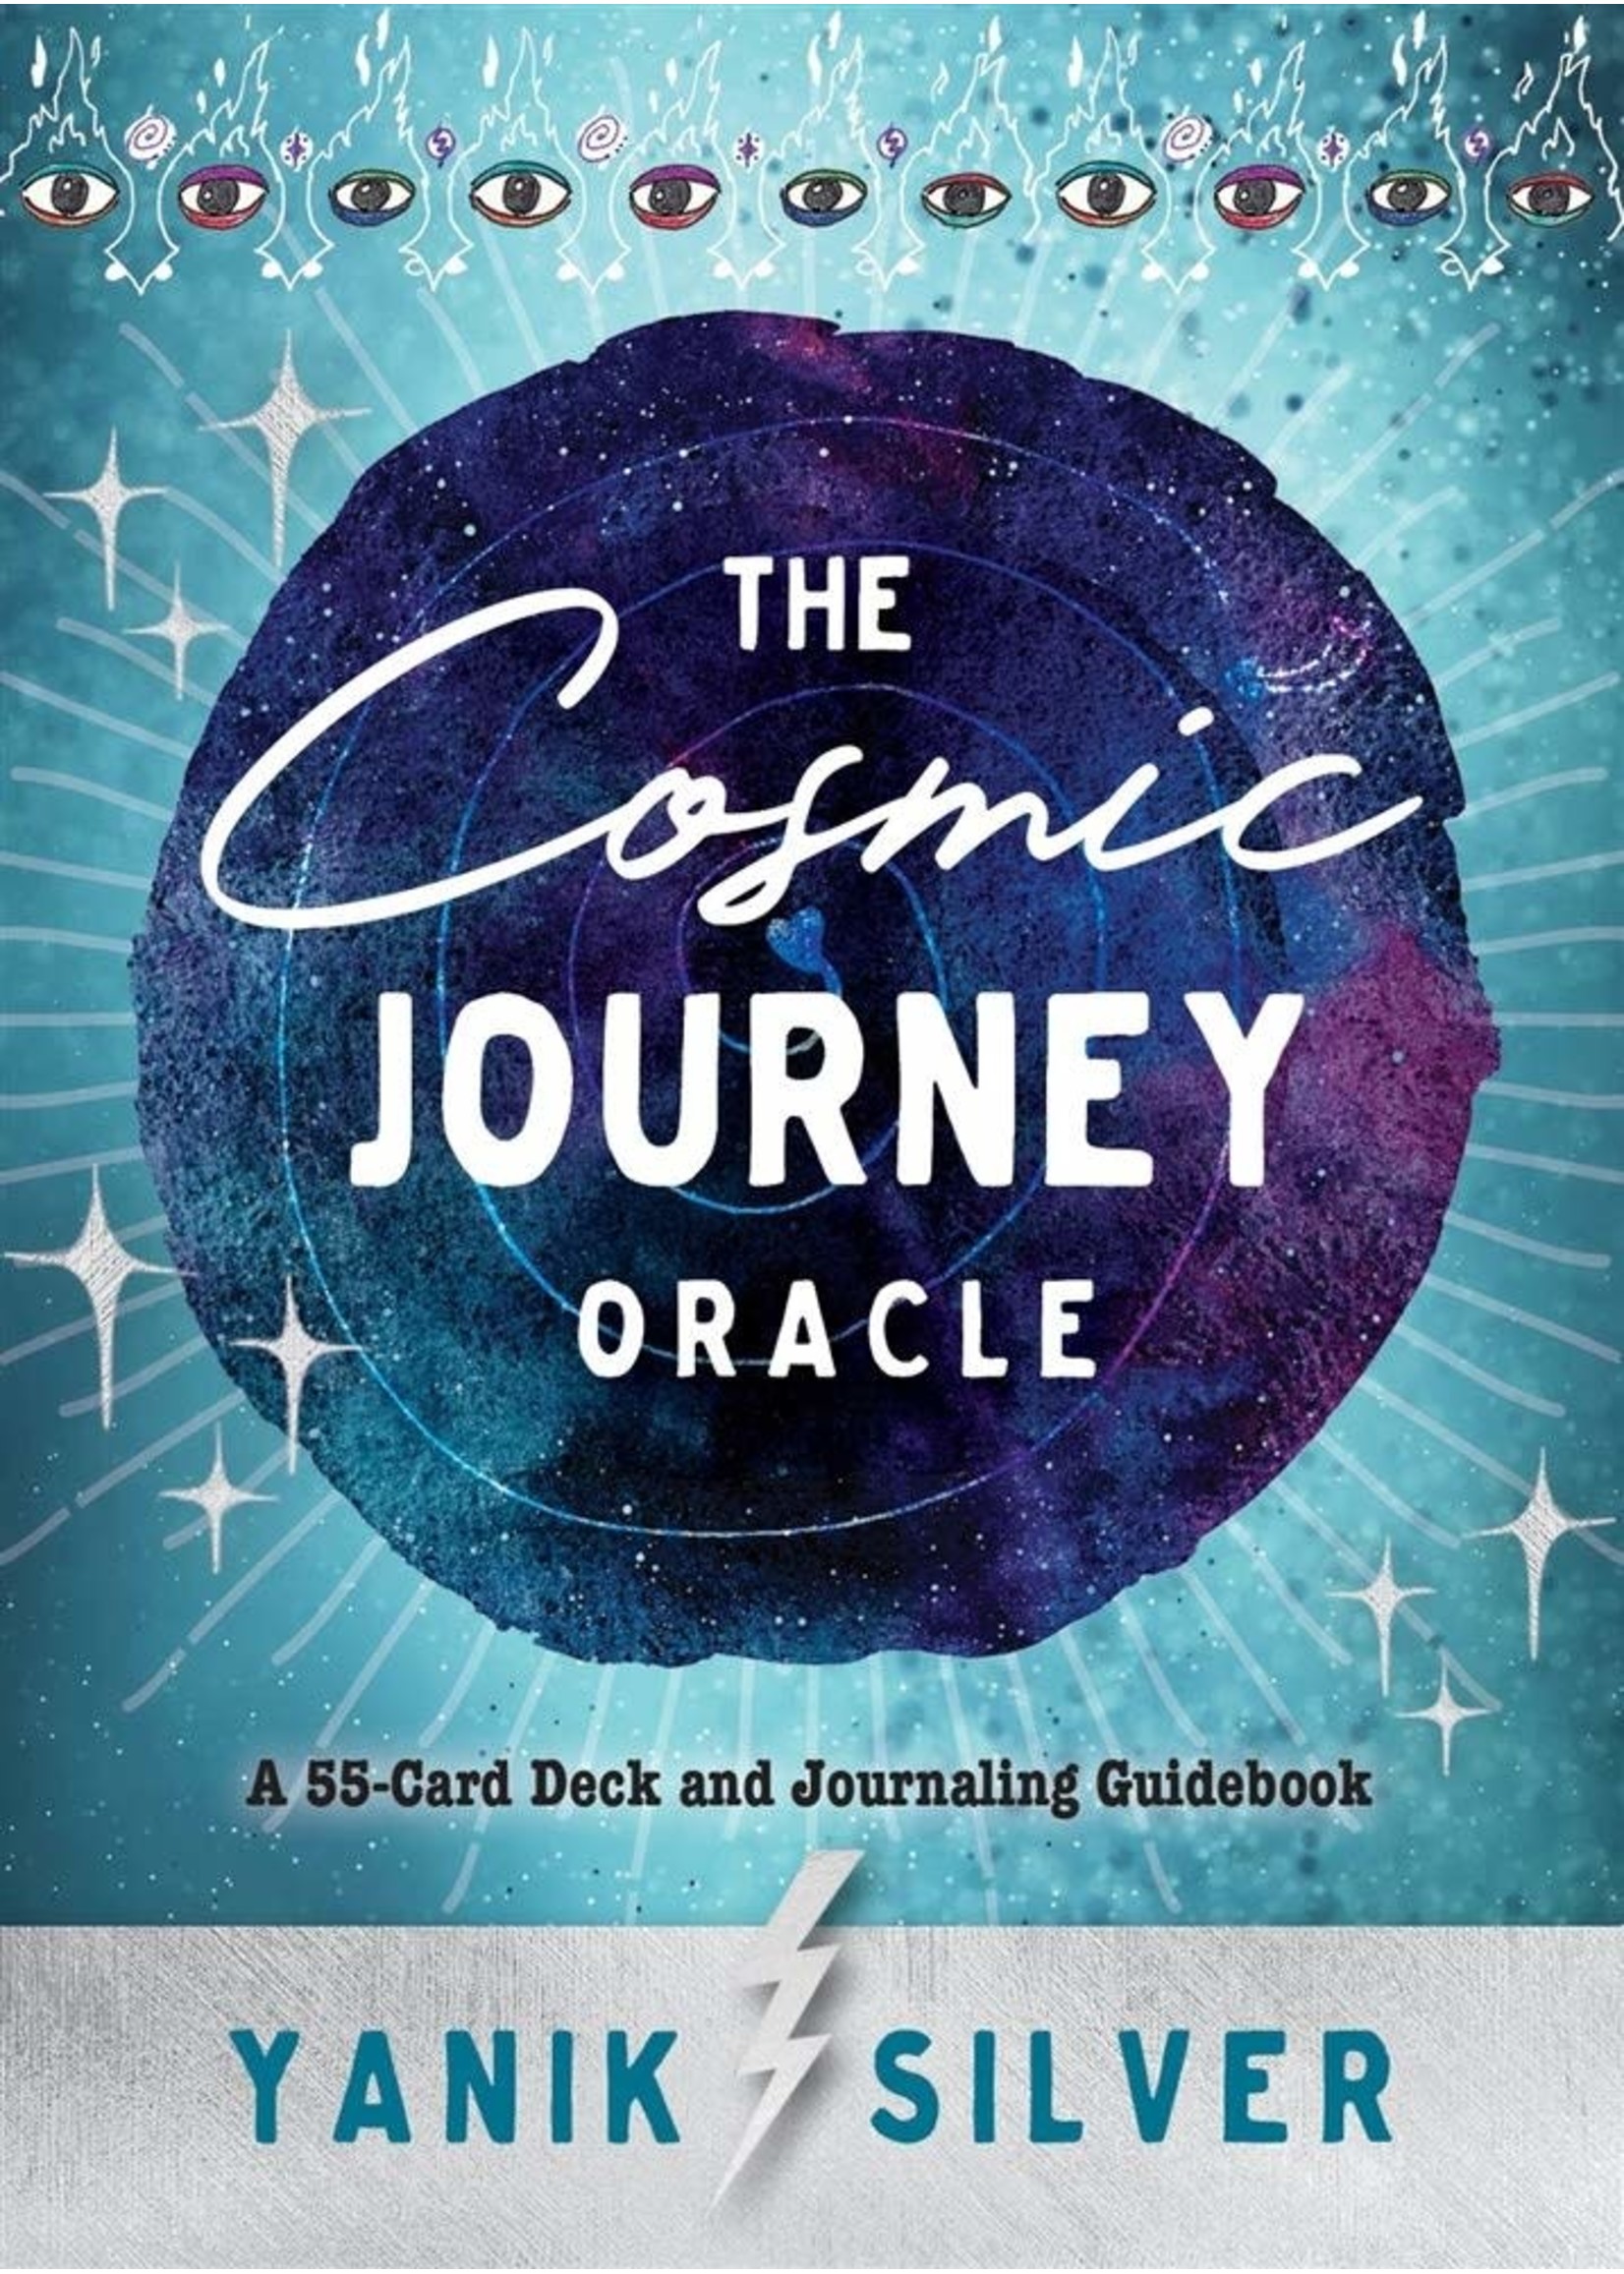 Deck The Cosmic Journey Oracle